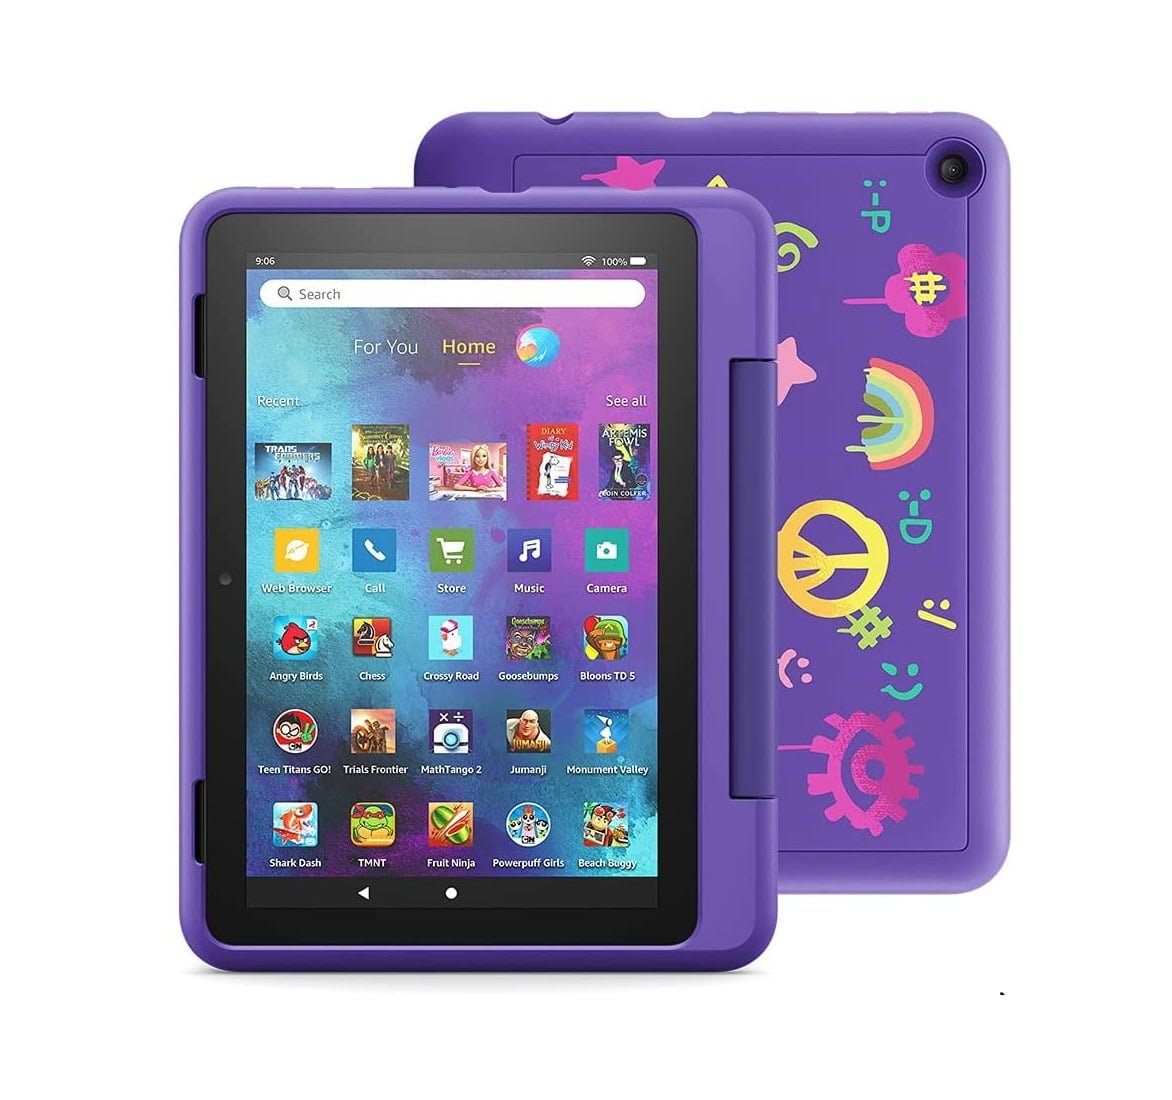 61Lm9X3Qjs. Ac Sl1000 Amazon &Amp;Lt;H1&Amp;Gt;Amazon Fire Hd 8 Kids Pro Tablet 10Th Gen, 8&Amp;Quot; Hd, Ages 6–12, 32 Gb, Doodle&Amp;Lt;/H1&Amp;Gt; &Amp;Lt;Ul&Amp;Gt; &Amp;Lt;Li&Amp;Gt;&Amp;Lt;Span Class=&Amp;Quot;A-List-Item&Amp;Quot;&Amp;Gt;He Web Browser Comes With Built-In Controls Designed To Help Filter Out Inappropriate Sites And Let Parents Add Or Block Specific Websites At Any Time. &Amp;Lt;/Span&Amp;Gt;&Amp;Lt;/Li&Amp;Gt; &Amp;Lt;Li&Amp;Gt;&Amp;Lt;Span Class=&Amp;Quot;A-List-Item&Amp;Quot;&Amp;Gt; Stay In Touch – Kids Can Send Announcements And Make Voice And Video Calls Over Wifi To Approved Contacts With An Alexa-Enabled Device Or The Alexa App. &Amp;Lt;/Span&Amp;Gt;&Amp;Lt;/Li&Amp;Gt; &Amp;Lt;Li&Amp;Gt;&Amp;Lt;Span Class=&Amp;Quot;A-List-Item&Amp;Quot;&Amp;Gt; Features A Quad-Core Processor, 2 Gb Ram, 8&Amp;Quot; Hd Display, Dual Cameras, Usb-C (2.0) Port, And Up To 1 Tb Of Expandable Storage.&Amp;Lt;/Span&Amp;Gt;&Amp;Lt;/Li&Amp;Gt; &Amp;Lt;/Ul&Amp;Gt; &Amp;Lt;Strong&Amp;Gt;Included In The Box&Amp;Lt;/Strong&Amp;Gt; Fire Hd 8 Tablet (10Th Gen), Amazon Kid-Friendly Case With Stand/Handle, Amazon Power Adapter, Usb-C(2.0) Charging Cable, Built-In Rechargeable Battery, And 1-Year Amazon Kids+ Subscription (Auto-Renews At Applicable Rate). Fire Hd 8 Amazon Fire Hd 8 Kids Pro Tablet 10Th Gen, 8&Amp;Quot; Hd, Ages 6–12, 32 Gb, Doodle